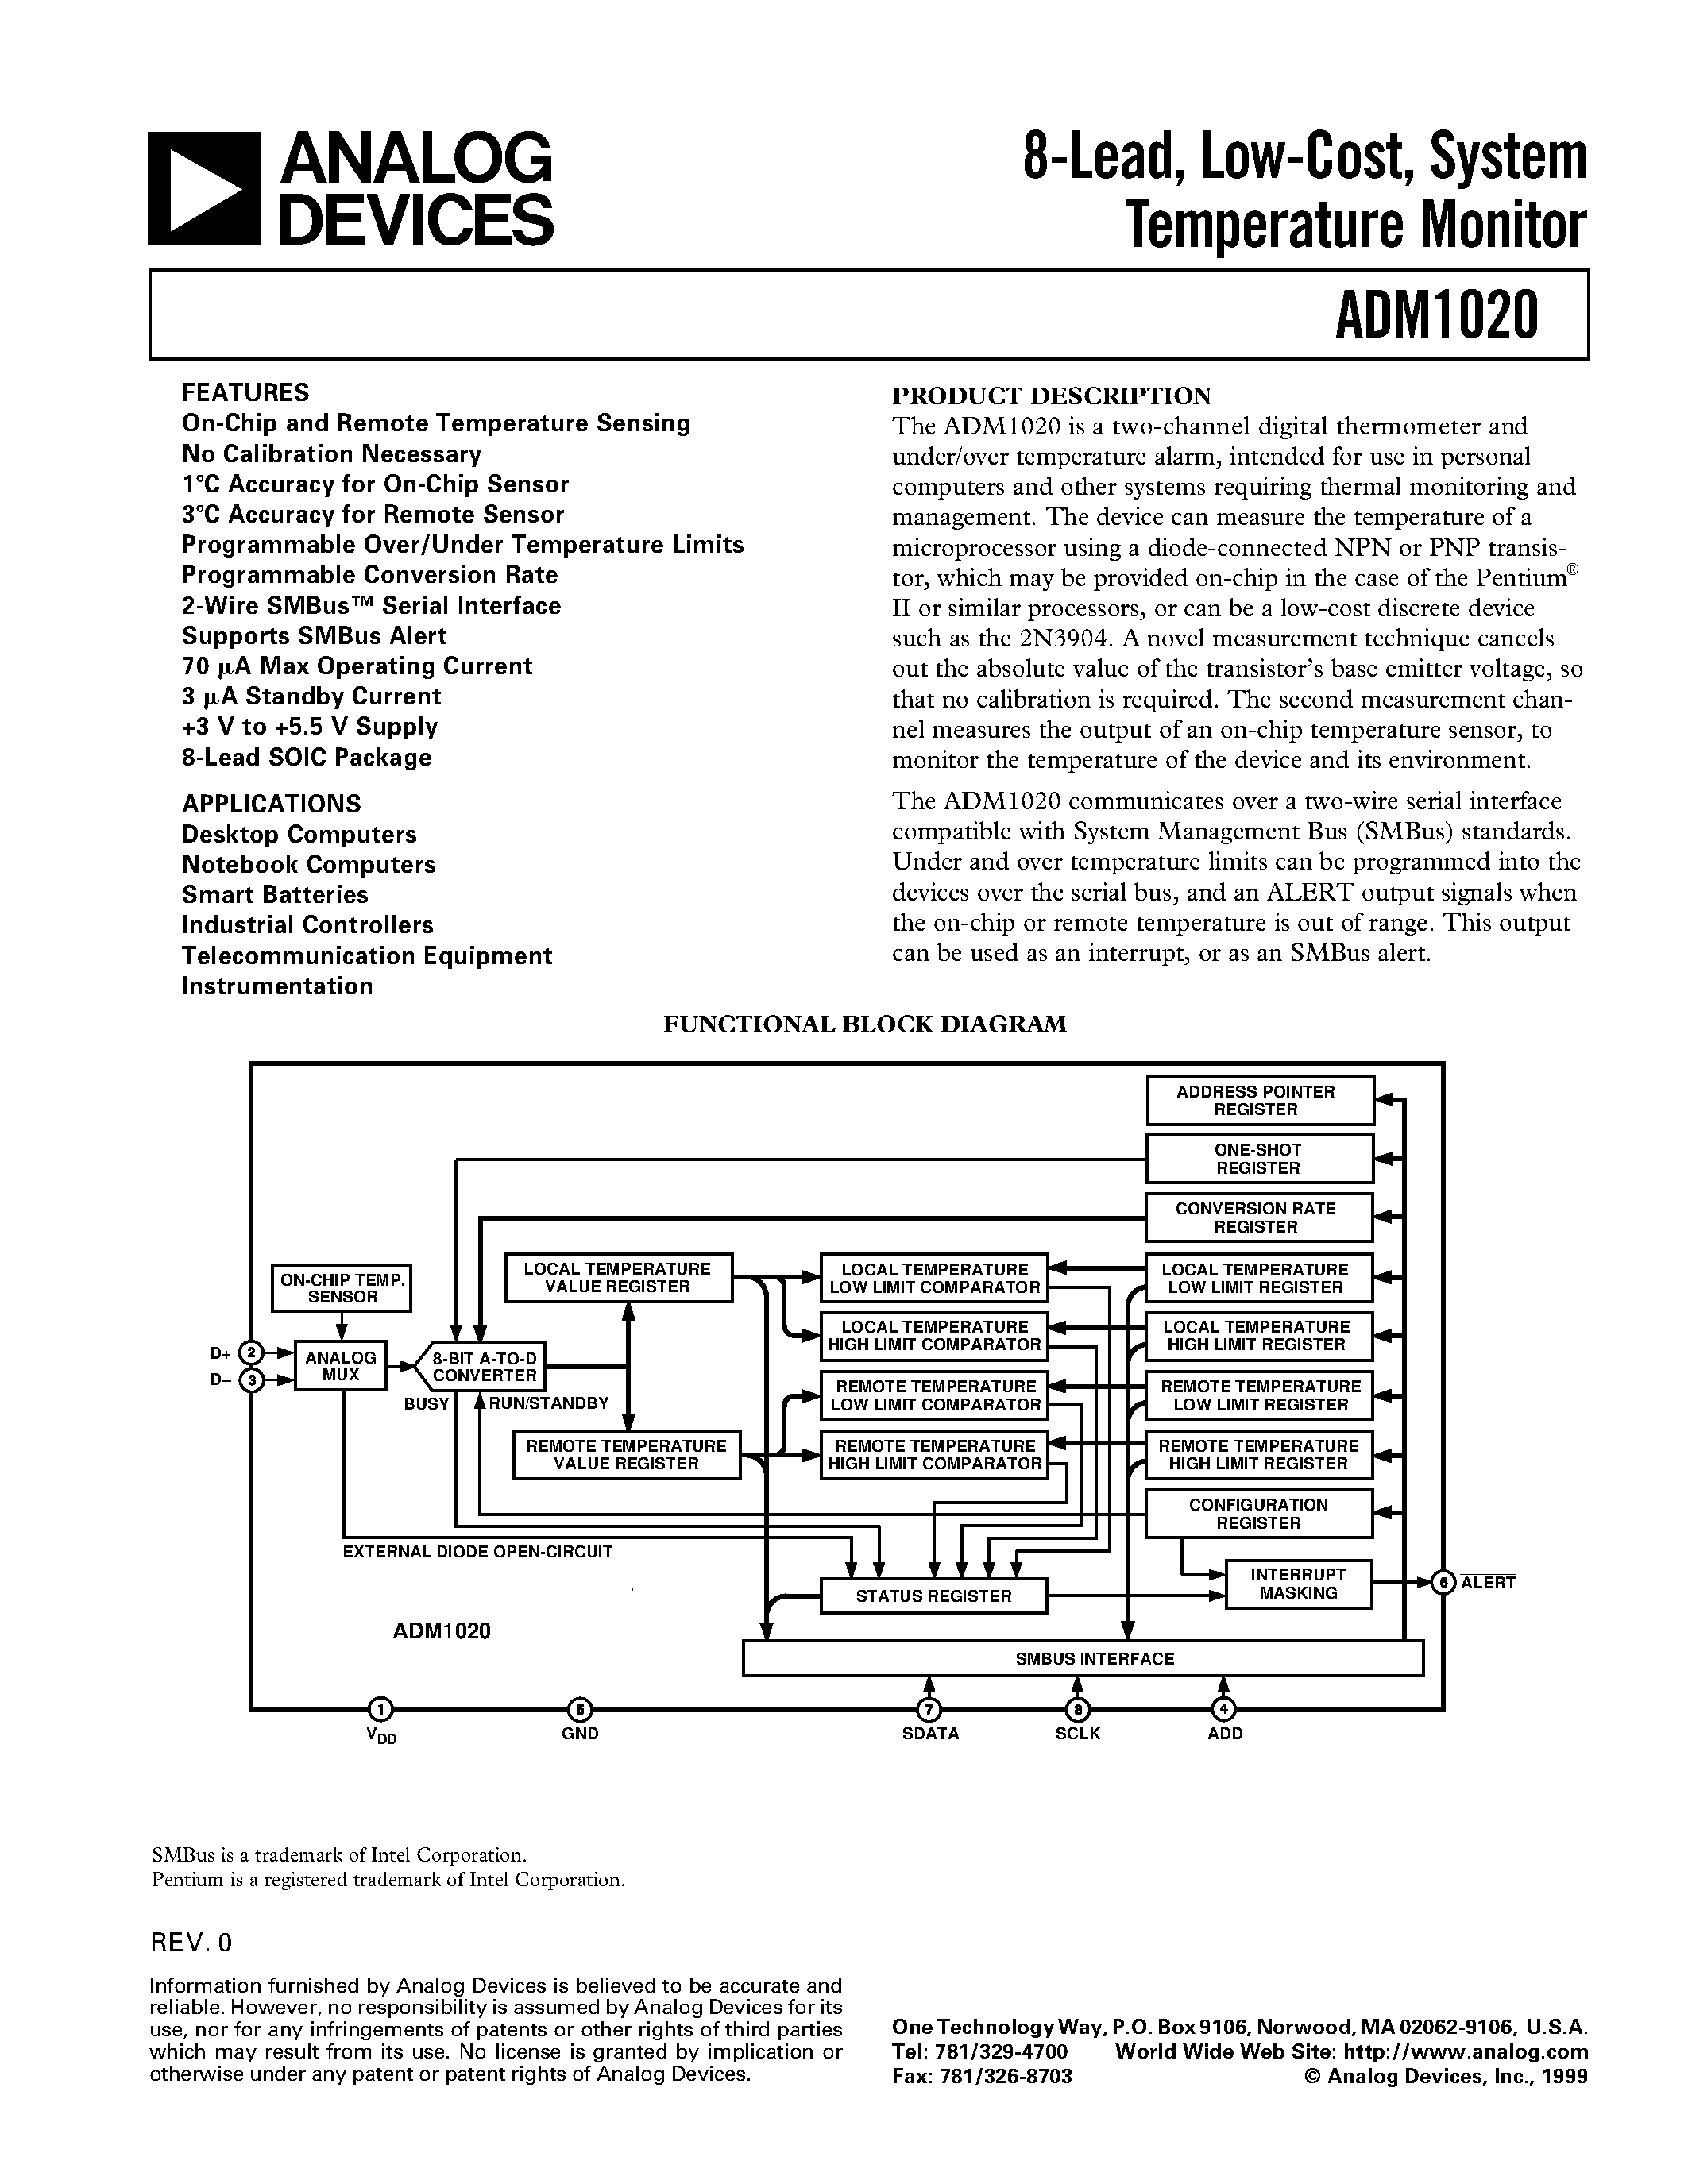 Datasheet ADM1020 - 8-Lead/ Low-Cost/ System Temperature Monitor page 1